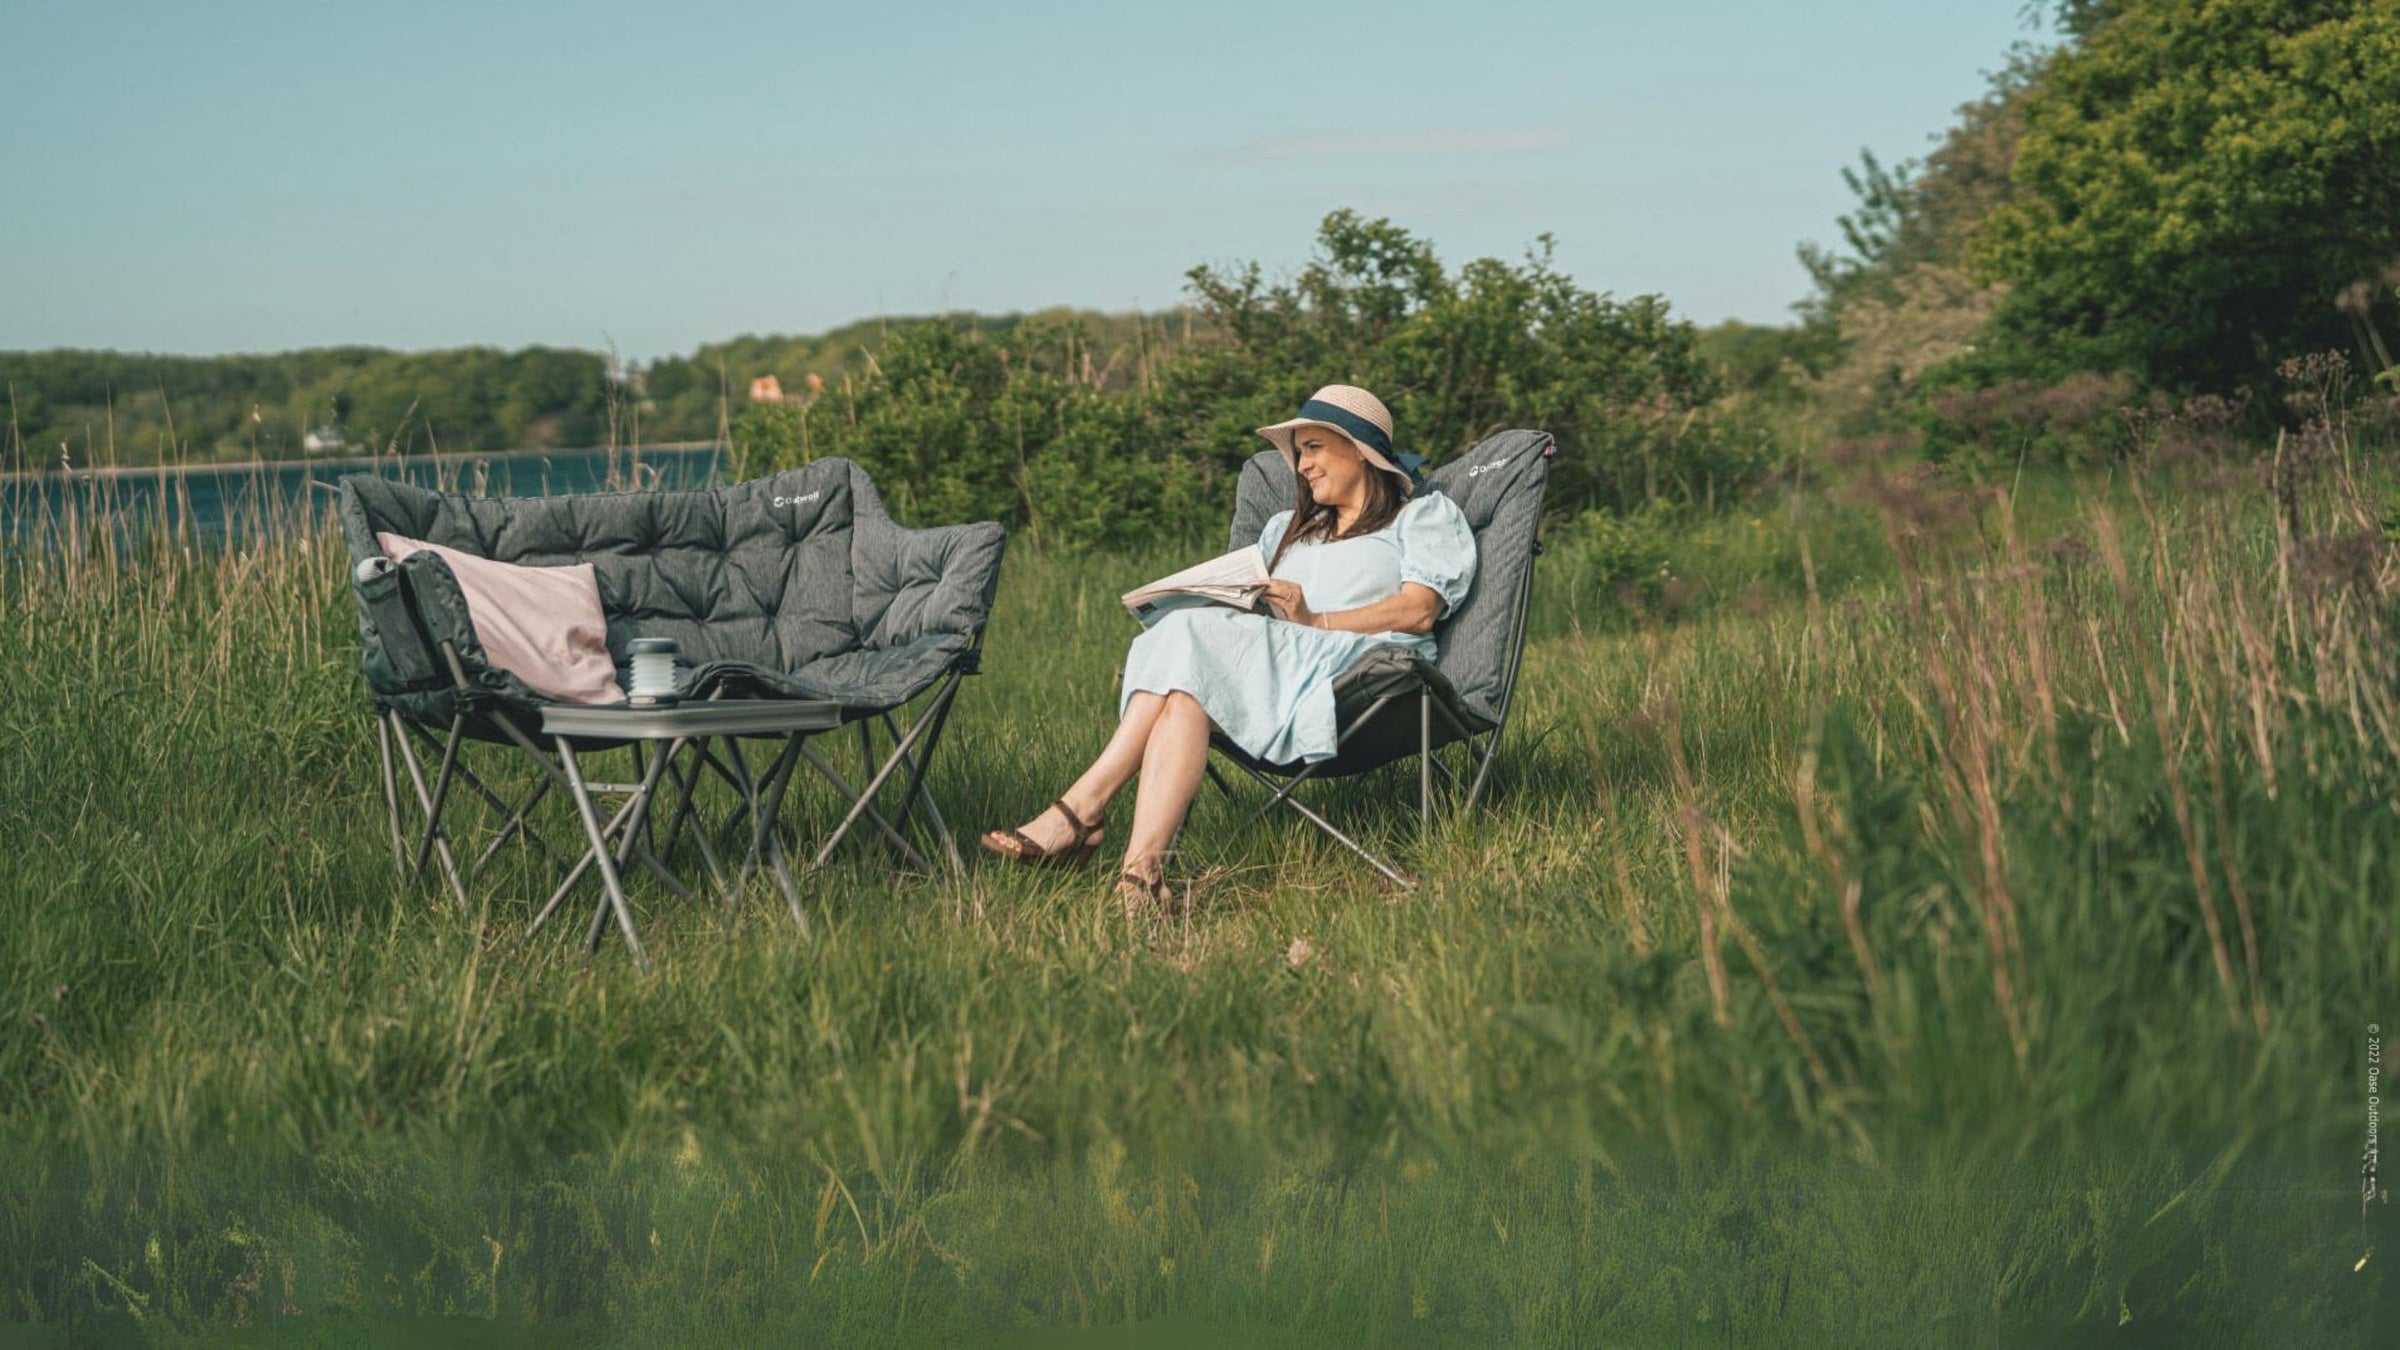 Camping Chairs - Folding chairs, Reclining chairs, Stools and Loungers